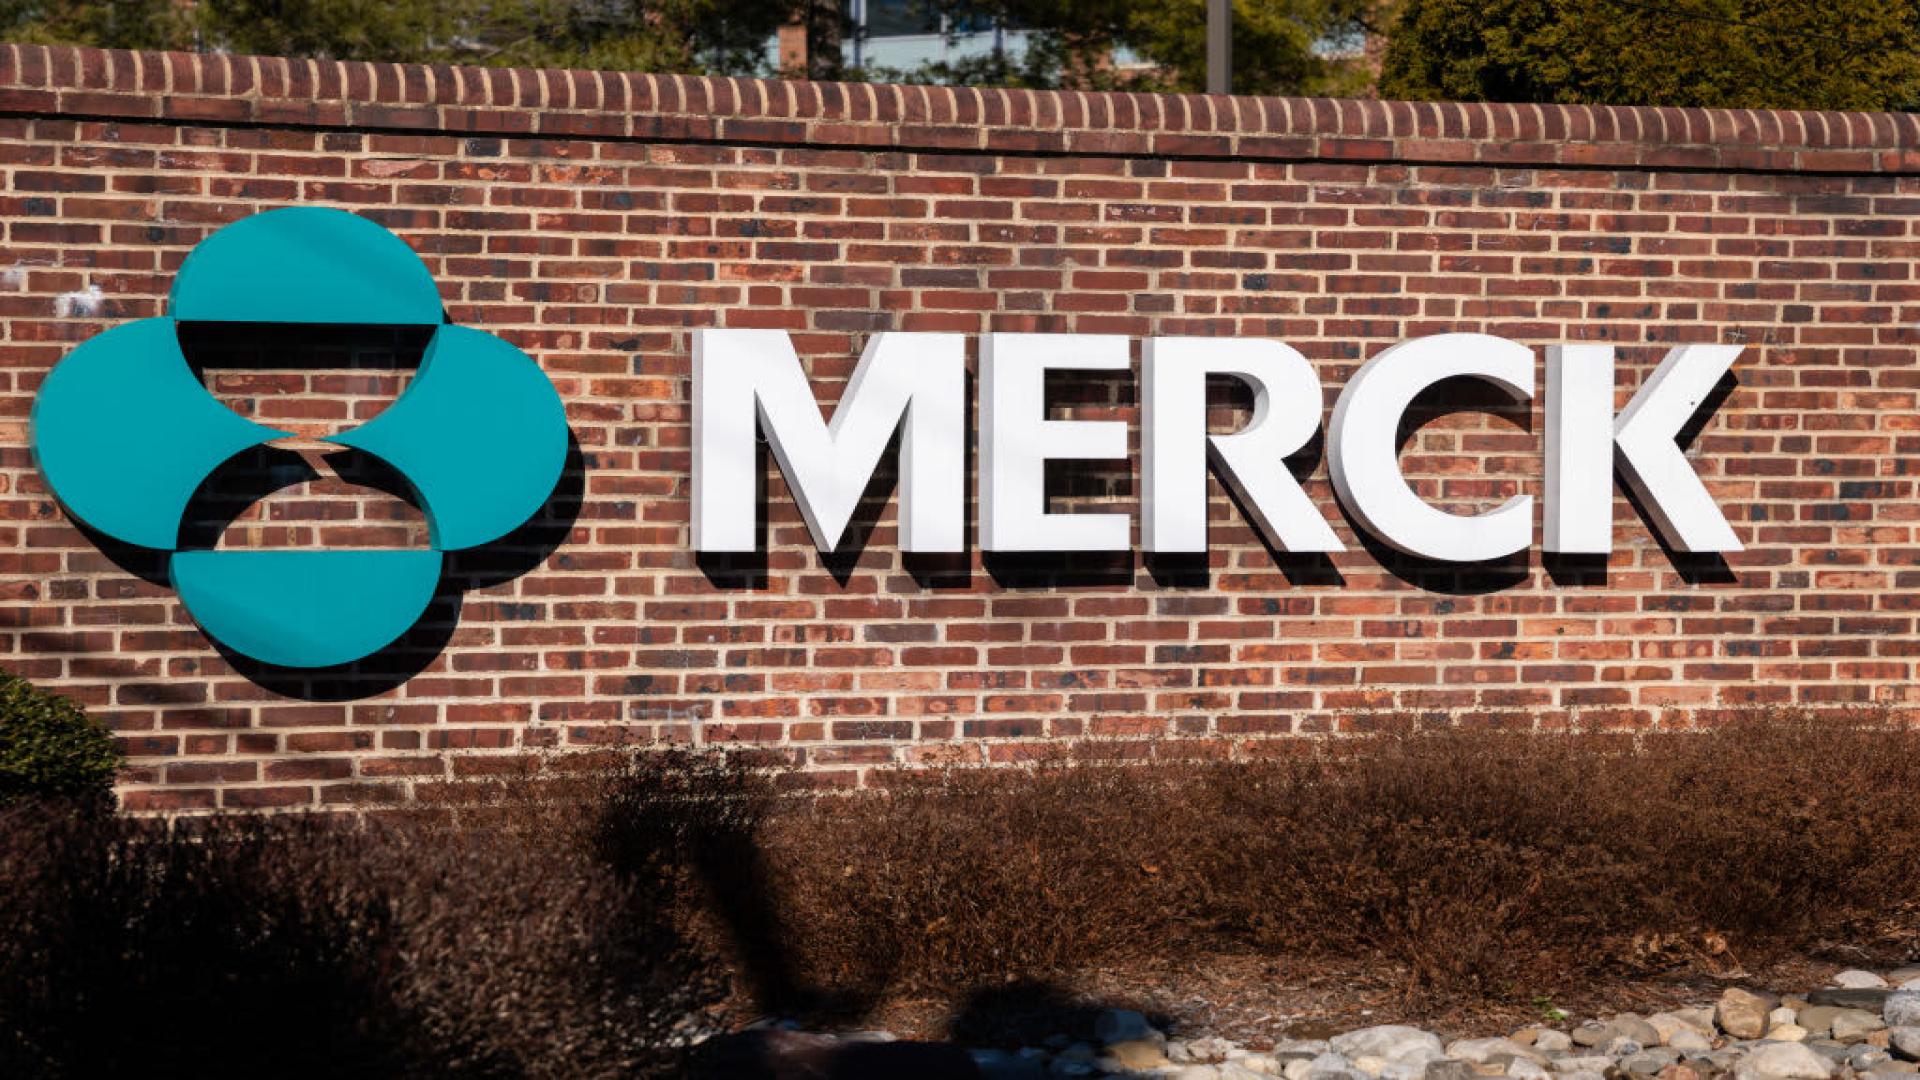 Merck beats earnings expectations, raises outlook on strong Keytruda and vaccine sales